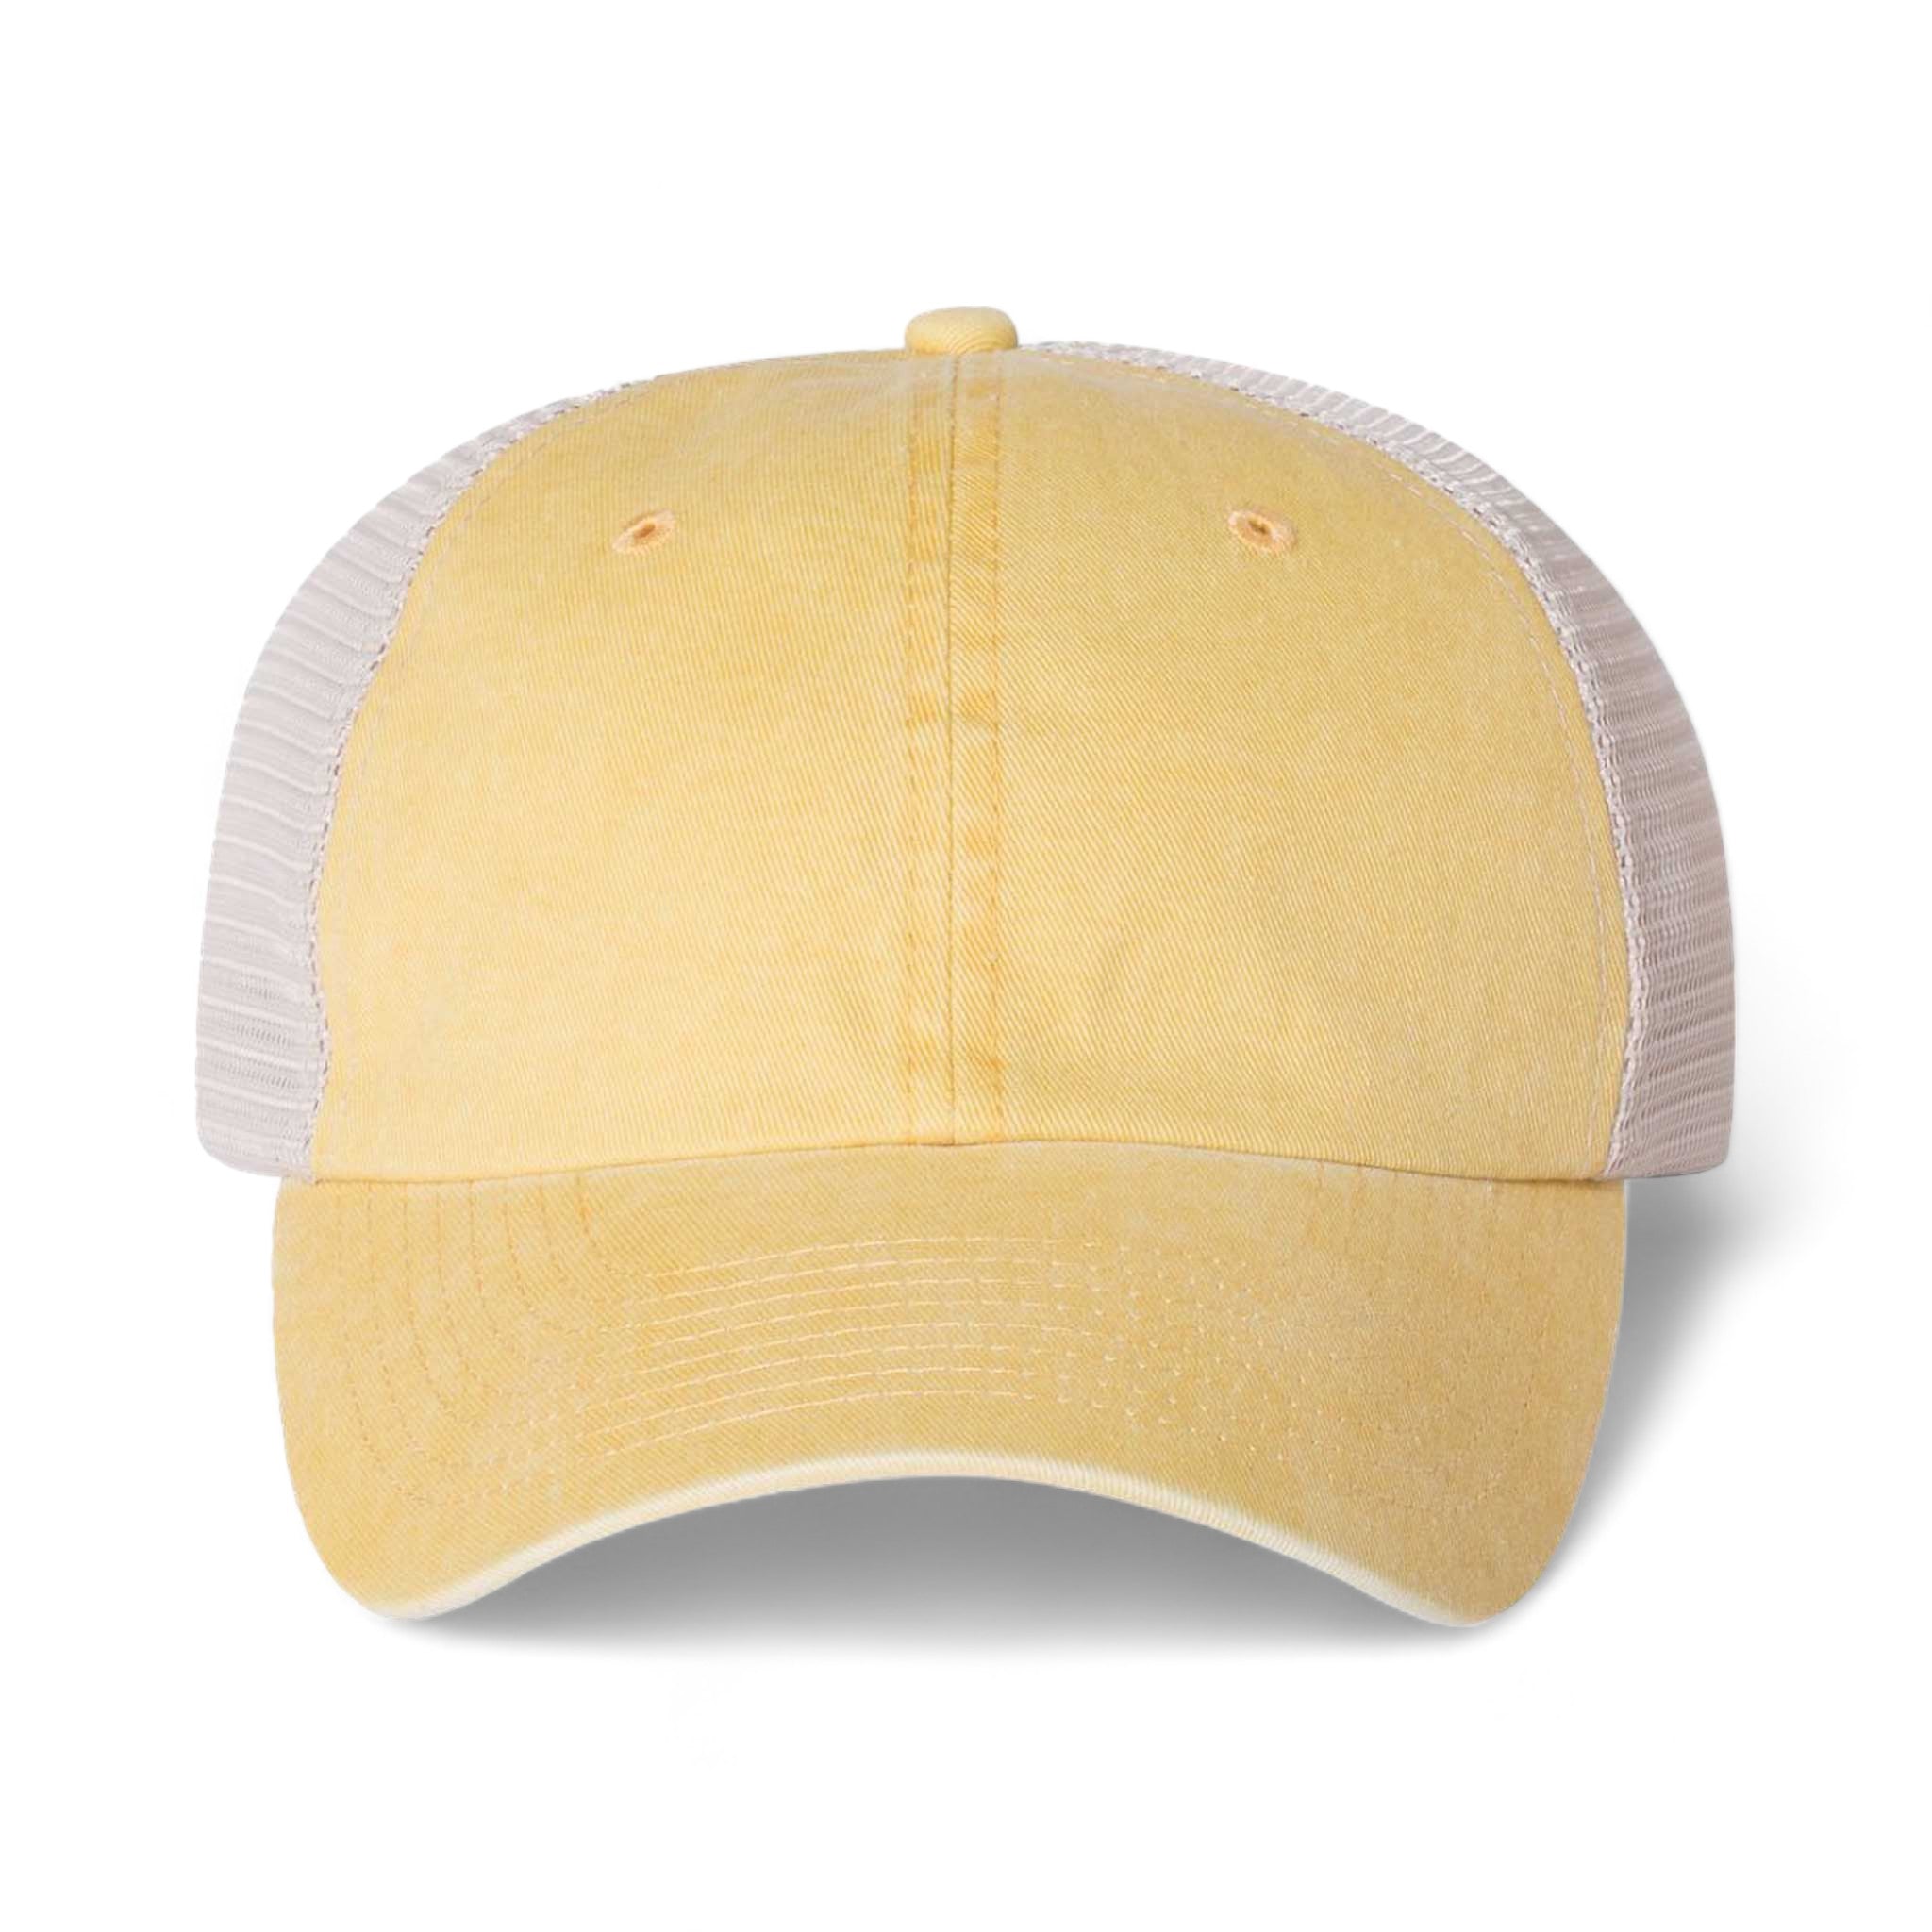 Front view of Sportsman SP510 custom hat in mustard yellow and stone